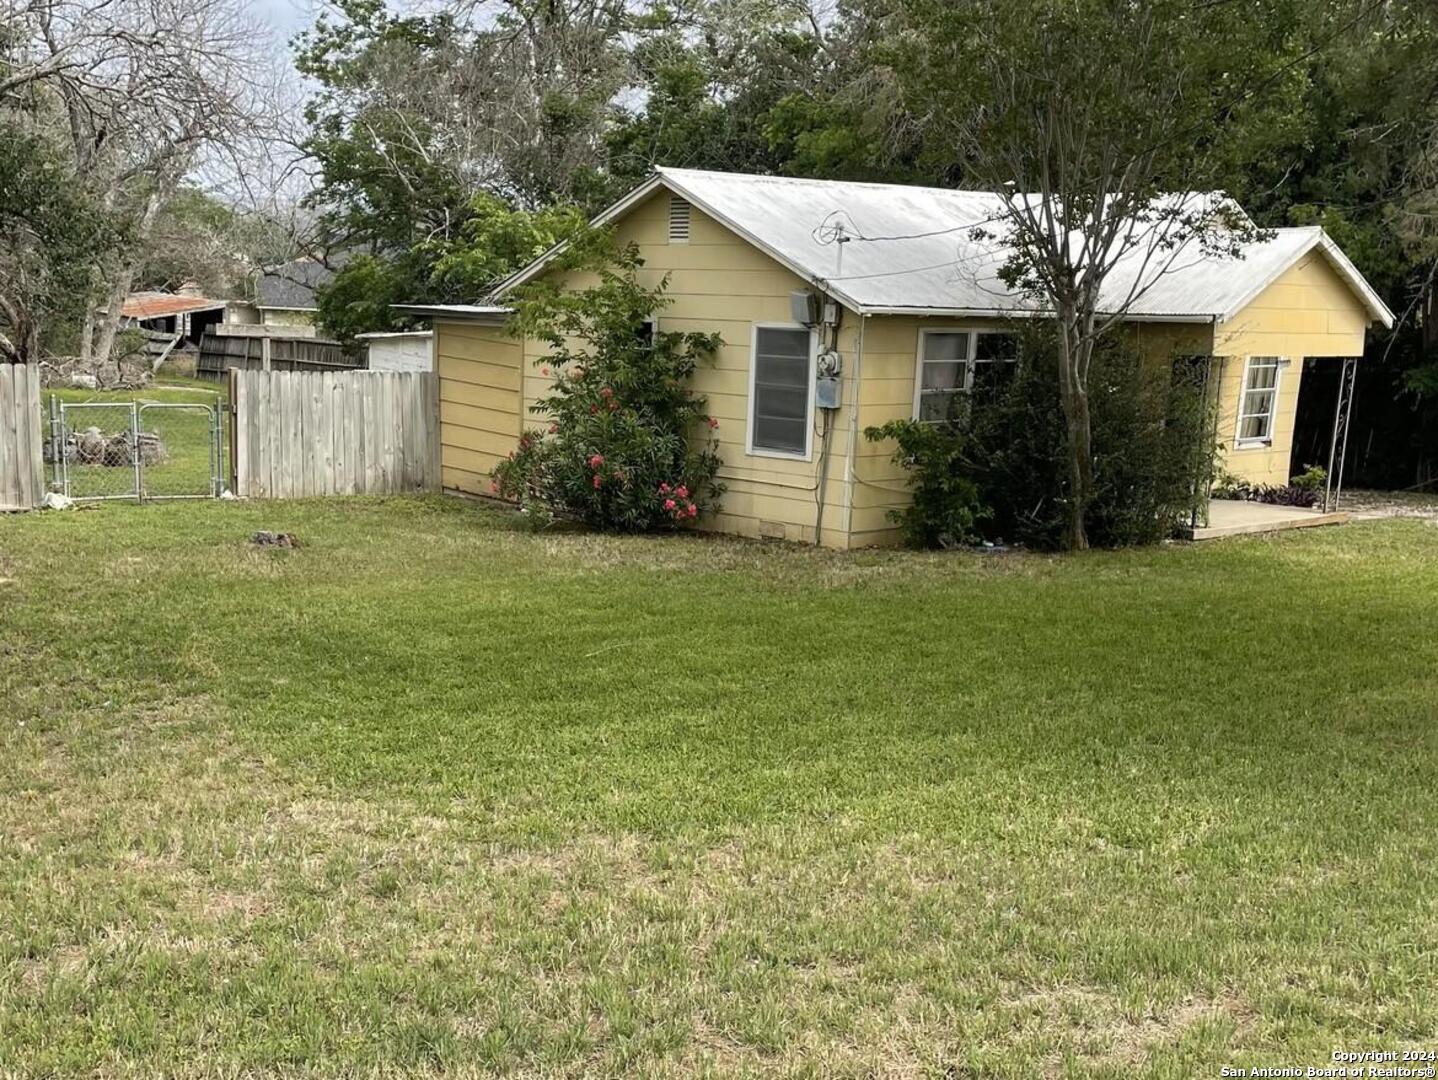 Photo of 2890 Morningside Dr in New Braunfels, TX